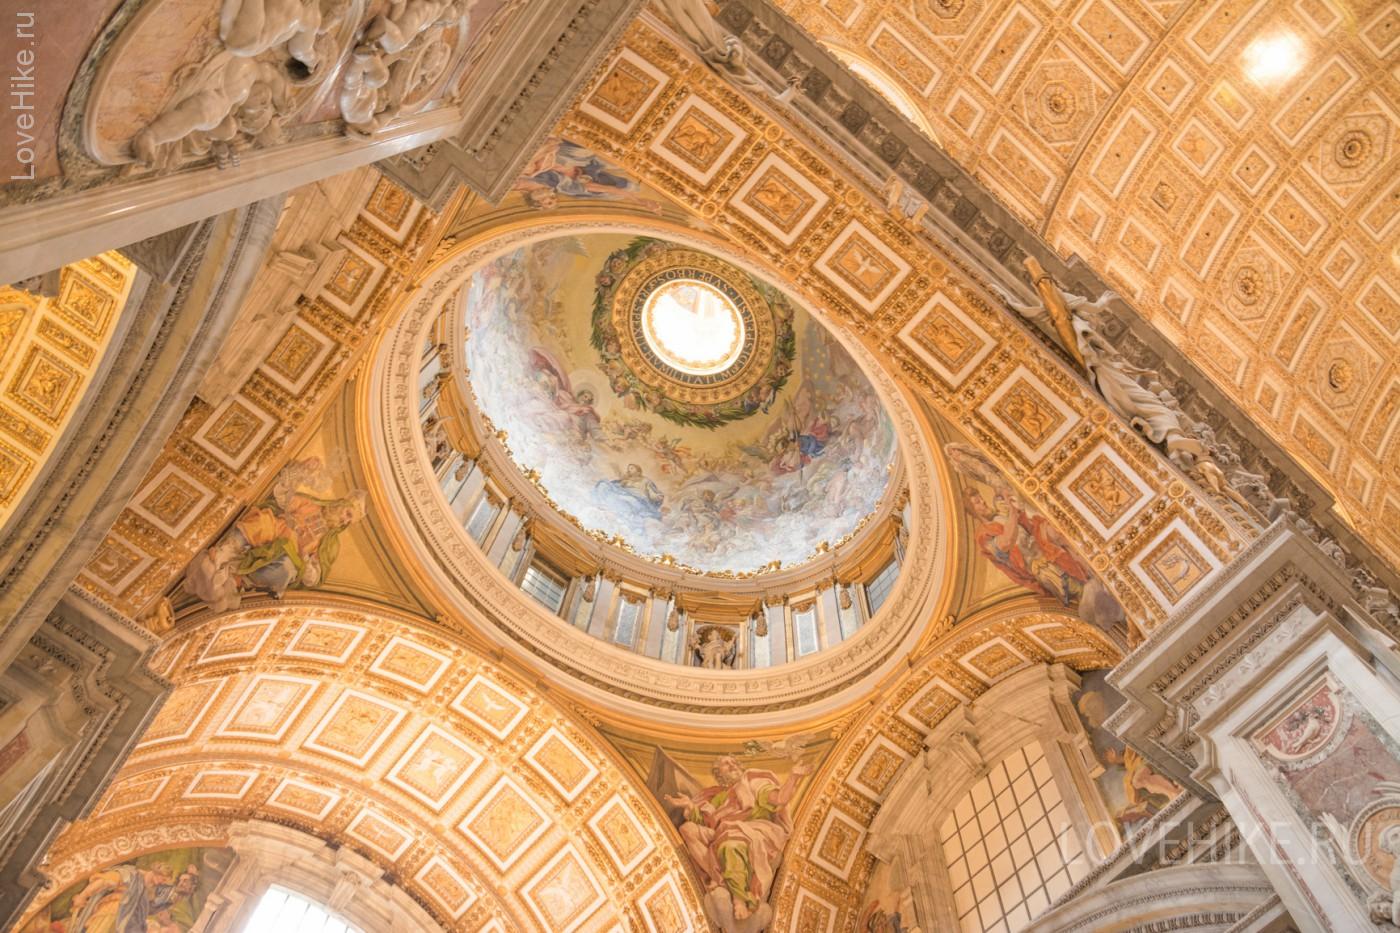 Vatican City, Rome, Italy - February 23, 2019: Interior ceiling of the Basilica of the Holy Apostle Peter in the Vatican, yellow color dome inside. Famous landmark in Rome.